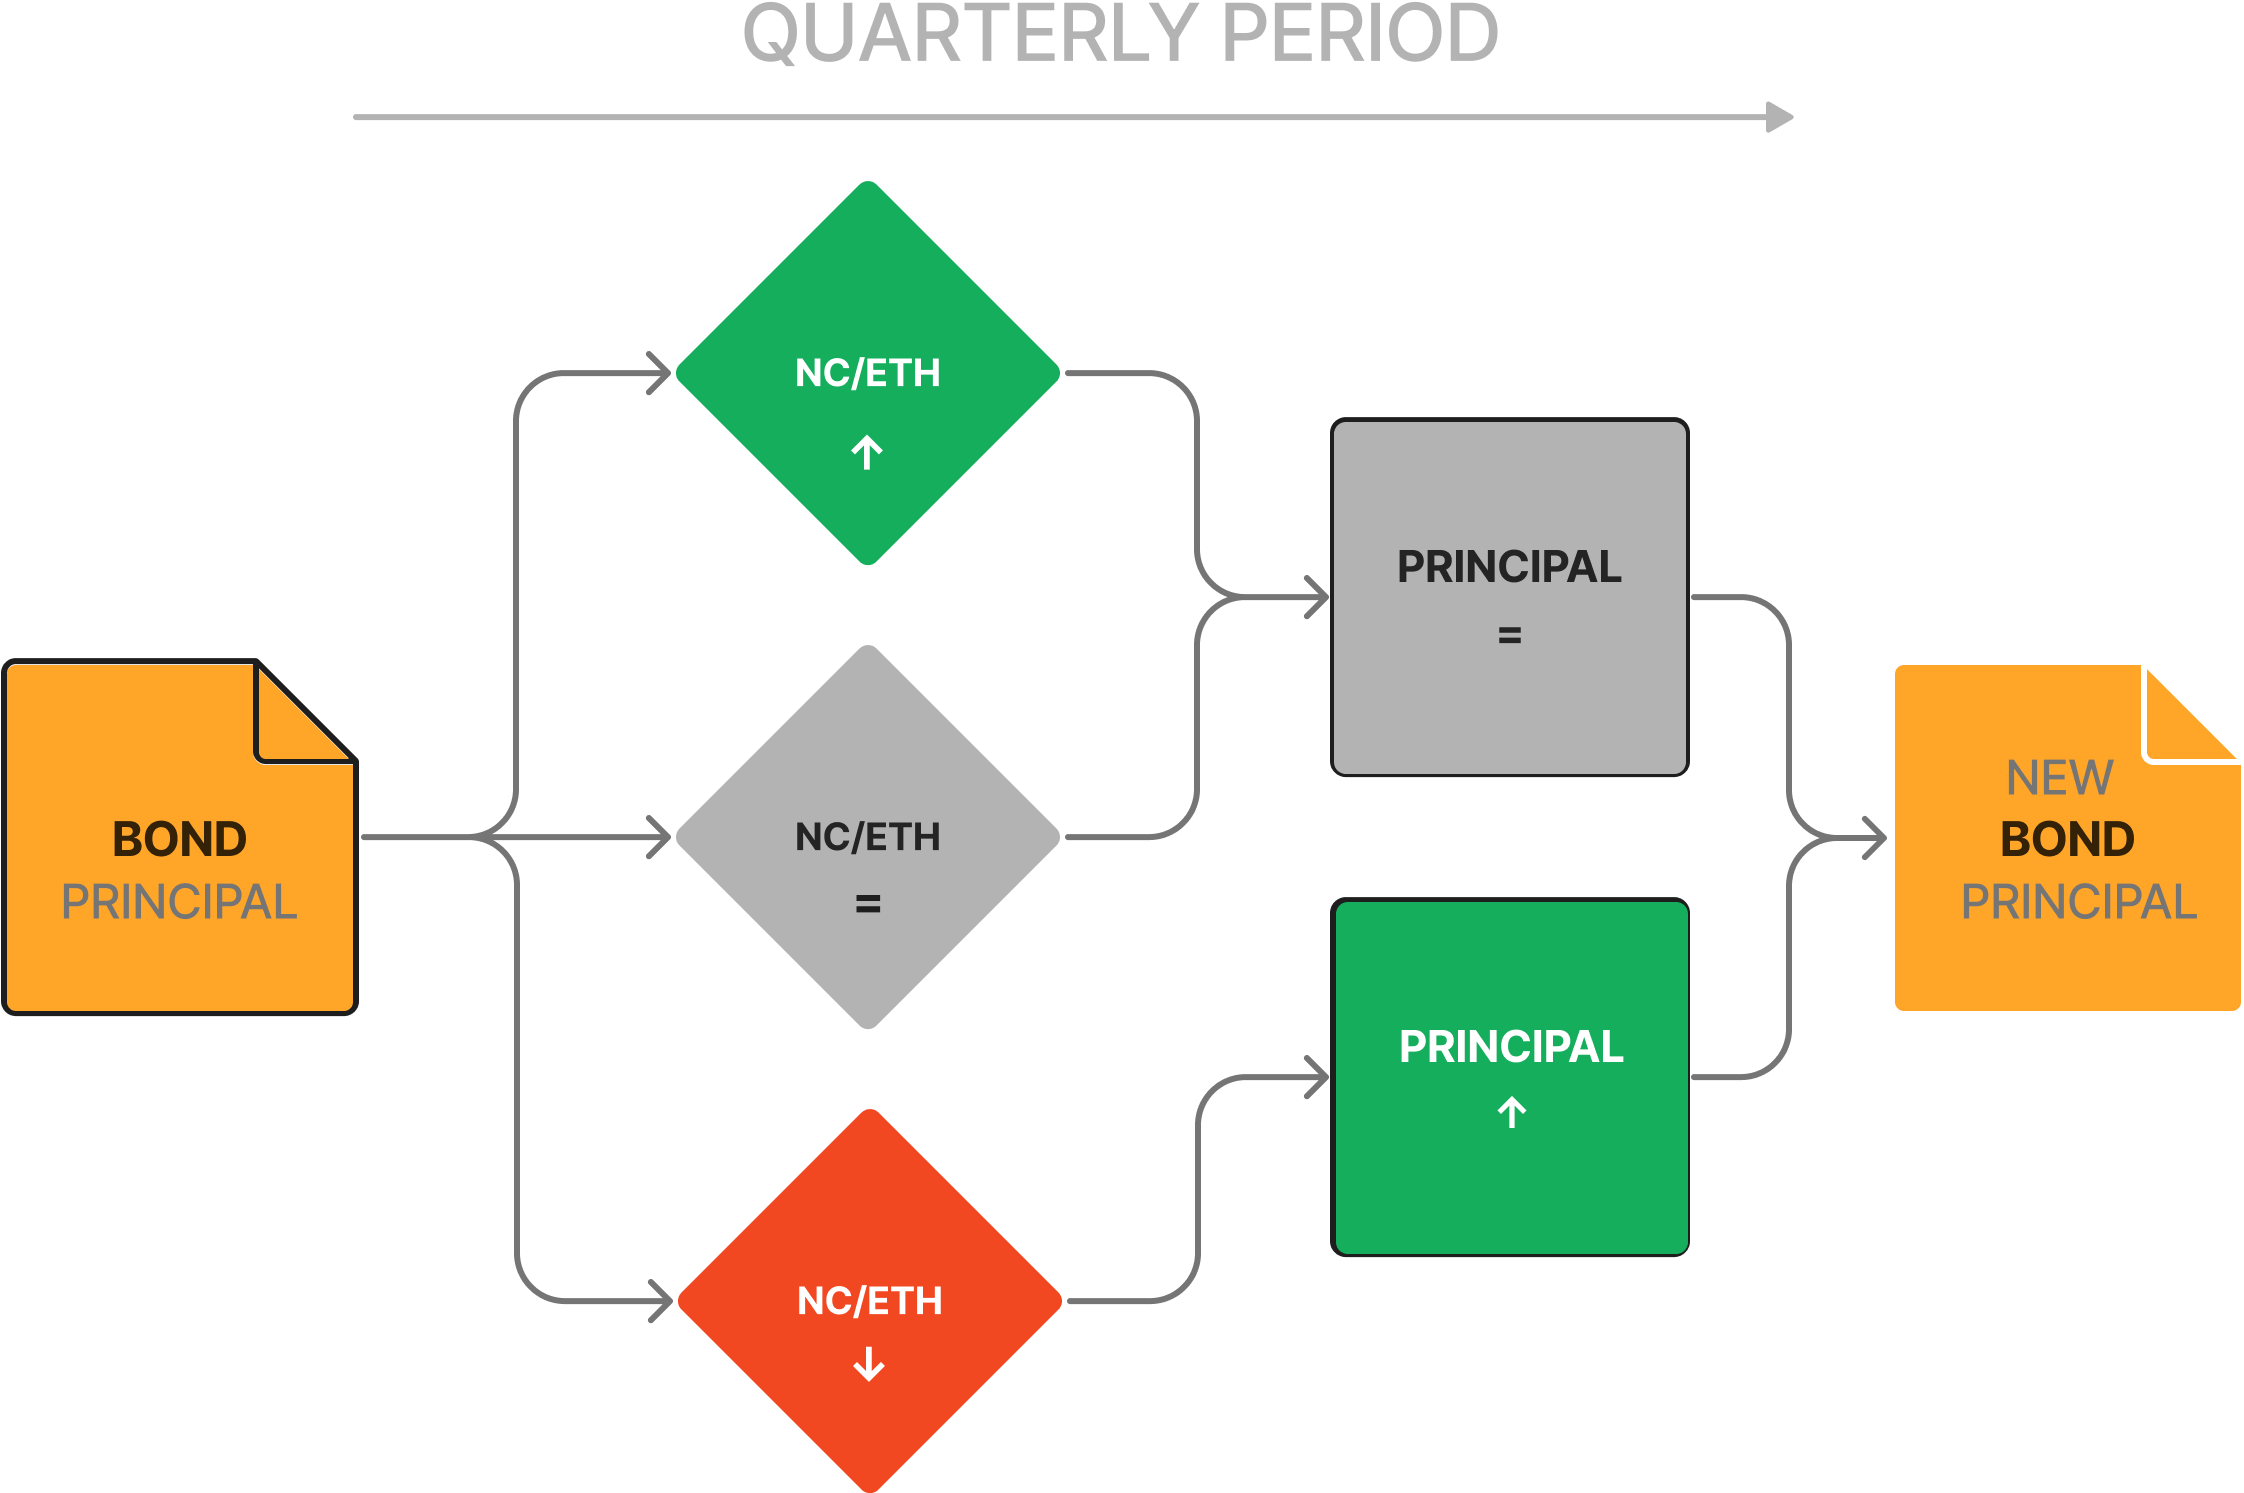 Example of the order of events during a quarterly period principal adjustment.